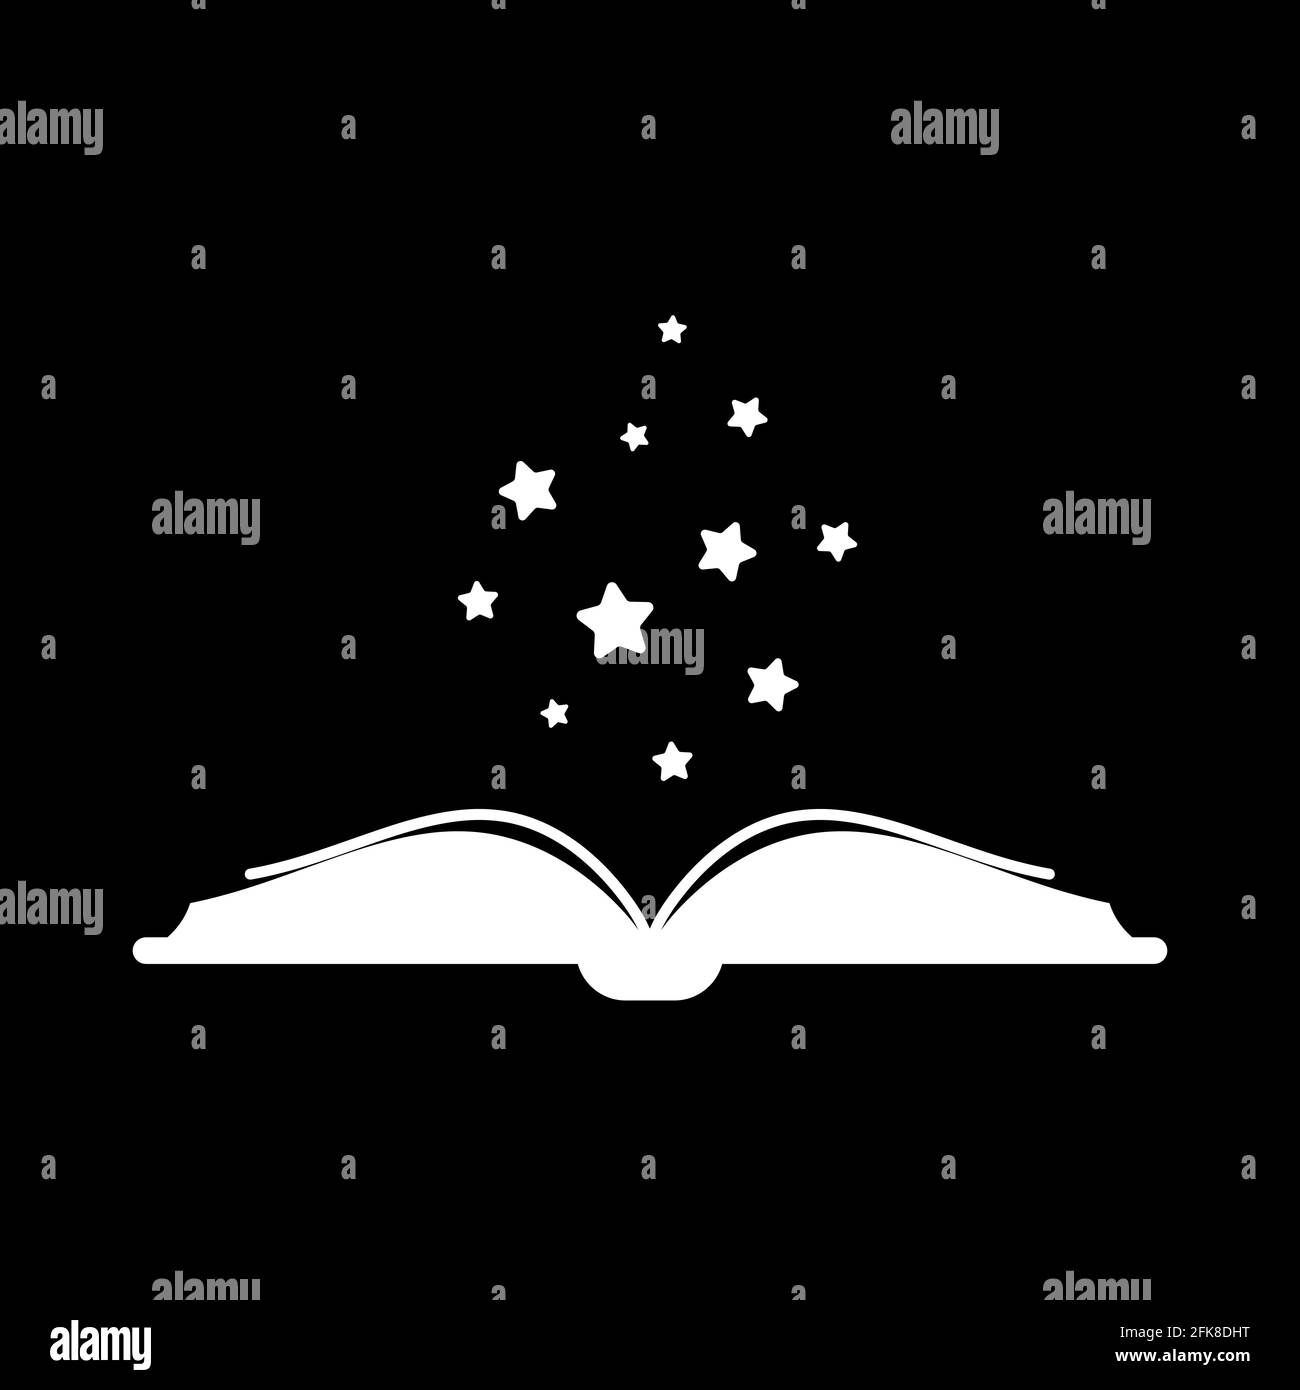 White open book with white stars flying out. Isolated on black background. Flat icon. Vector illustration. Magic book logo. Fairytale pictogram. Knowl Stock Vector